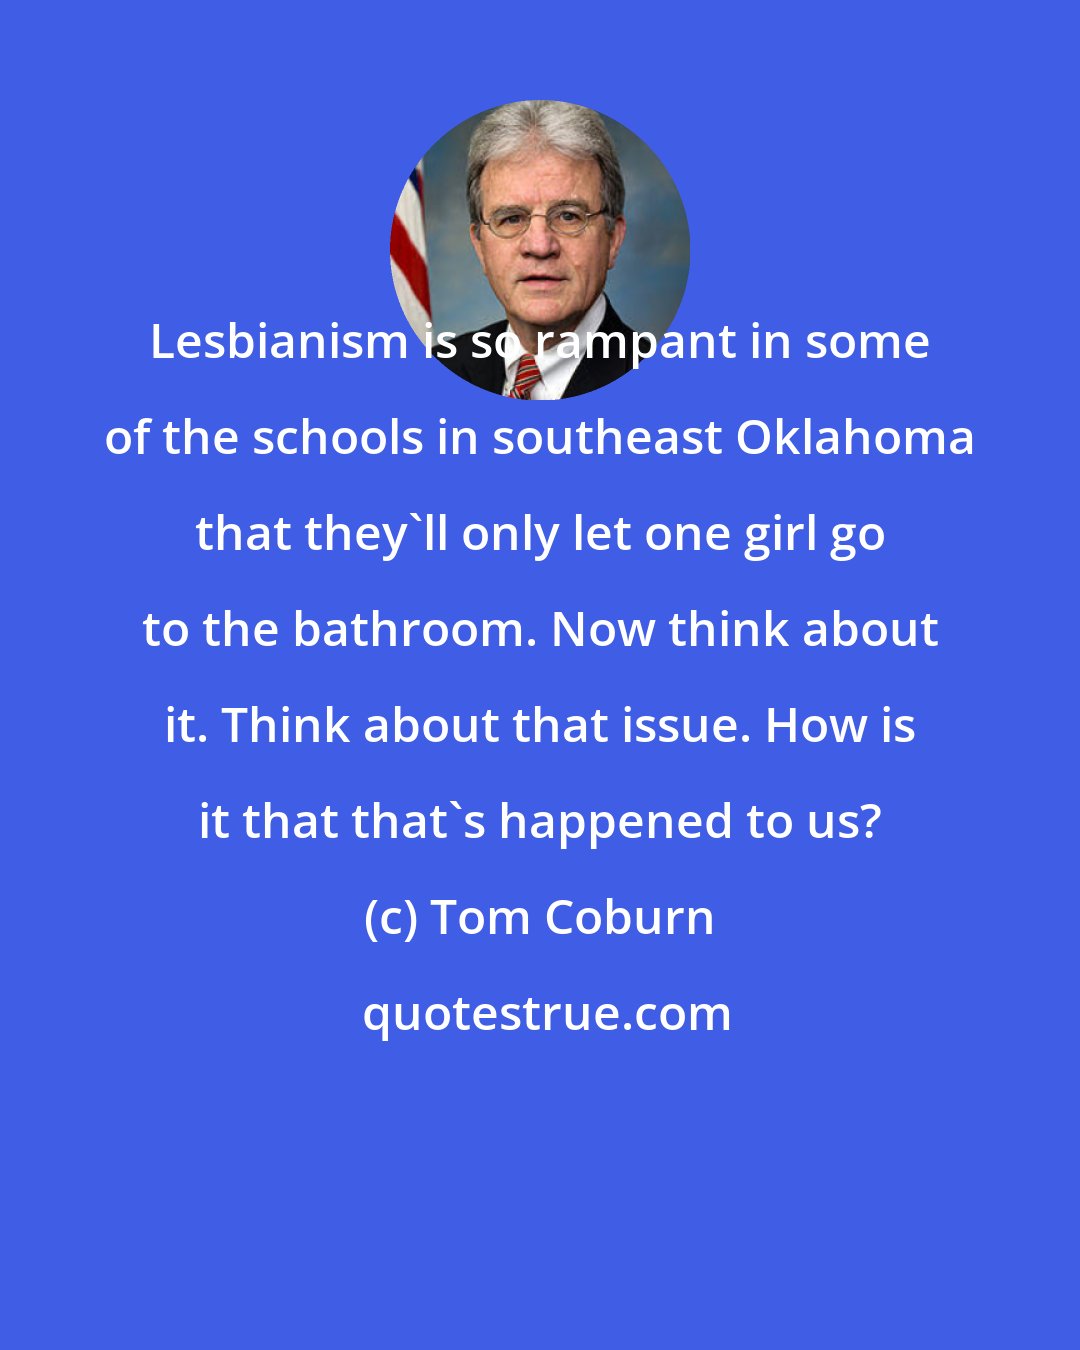 Tom Coburn: Lesbianism is so rampant in some of the schools in southeast Oklahoma that they'll only let one girl go to the bathroom. Now think about it. Think about that issue. How is it that that's happened to us?